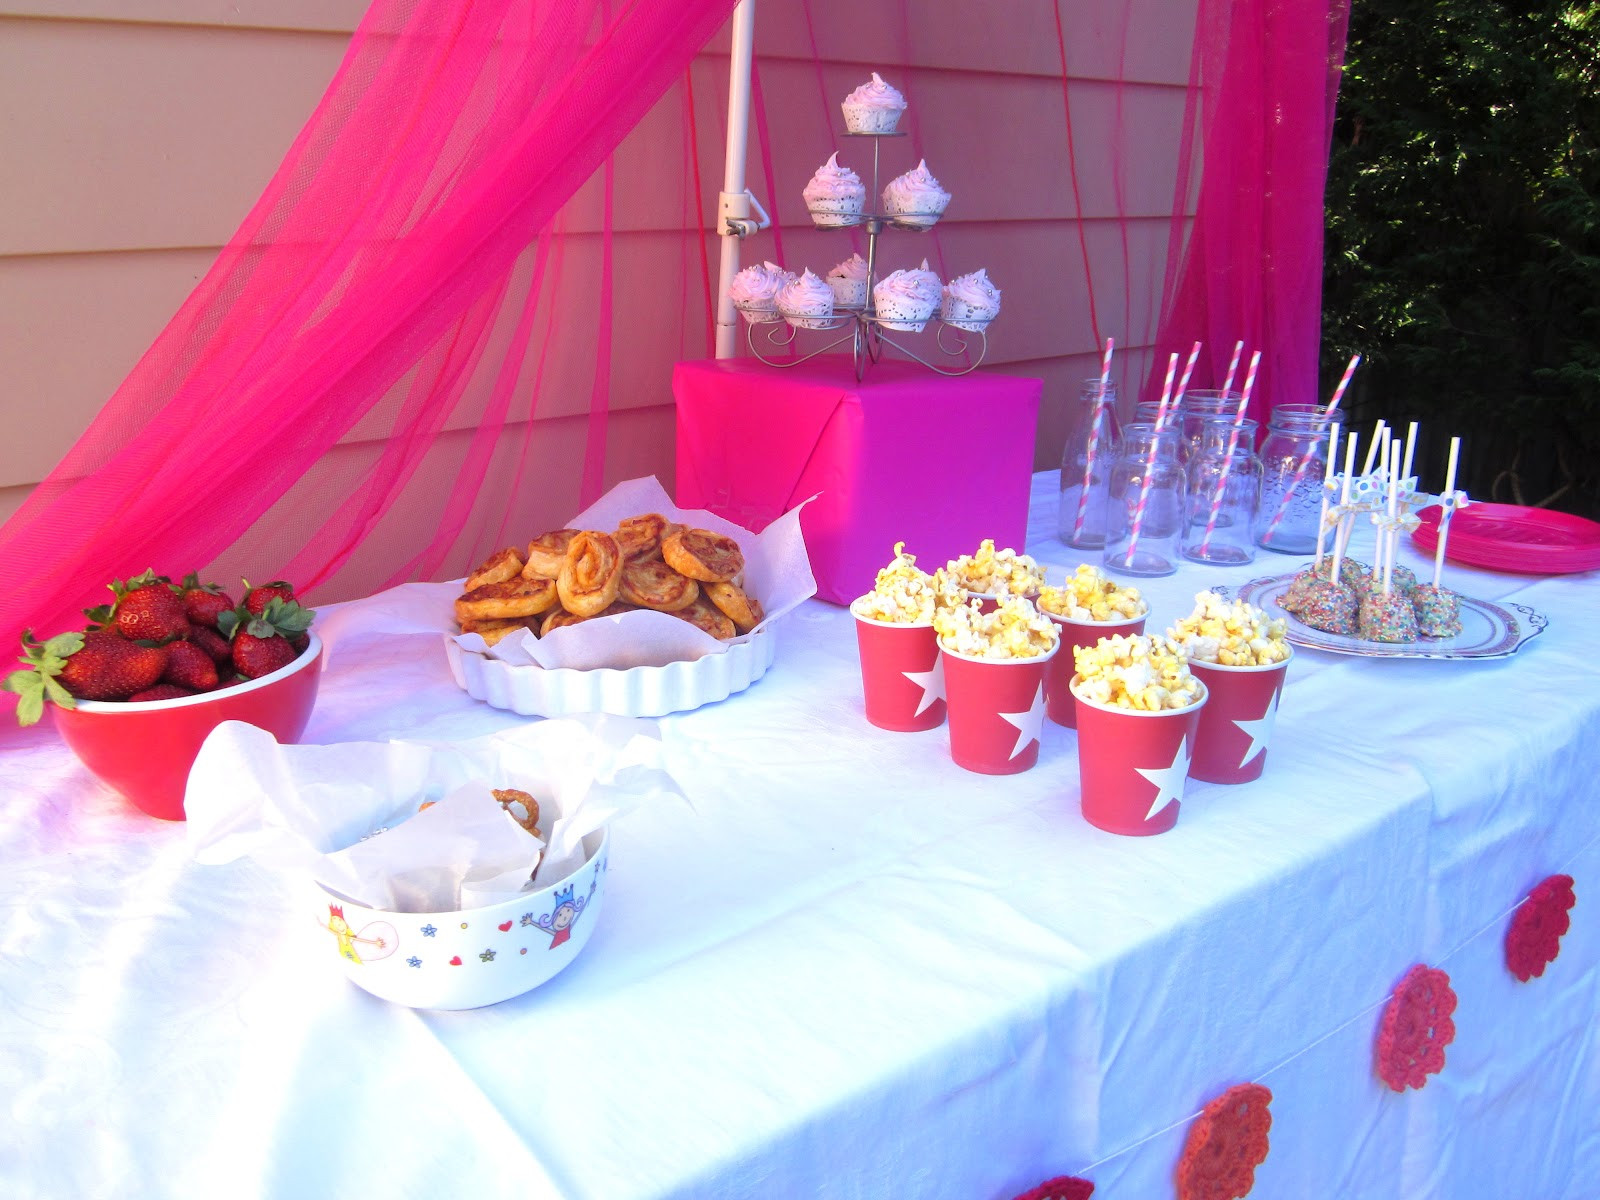 Girls Birthday Party Food Ideas
 Desire Empire Simple Food Ideas for a LIttle Girls Party